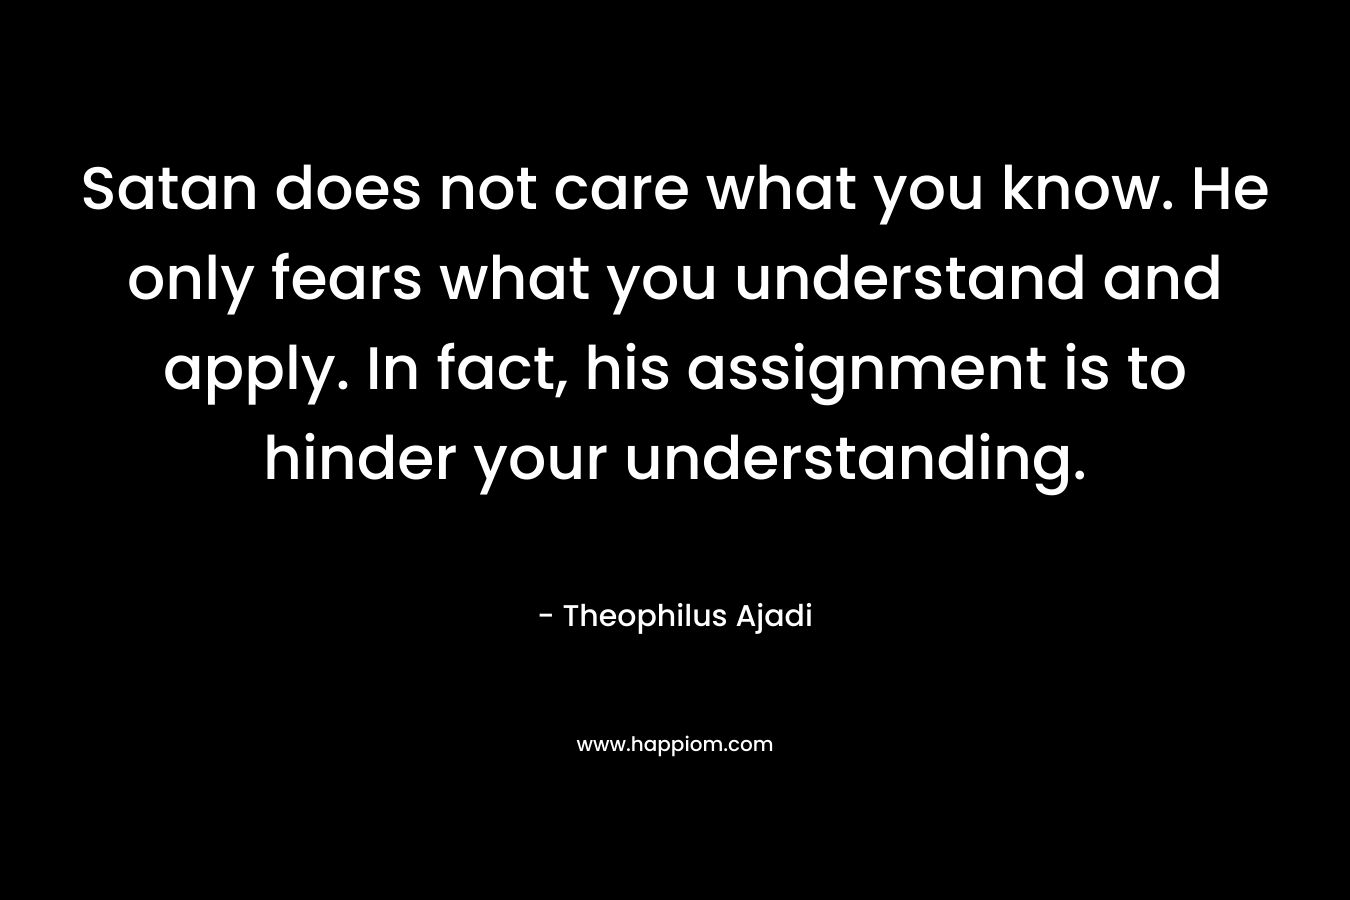 Satan does not care what you know. He only fears what you understand and apply. In fact, his assignment is to hinder your understanding. – Theophilus Ajadi